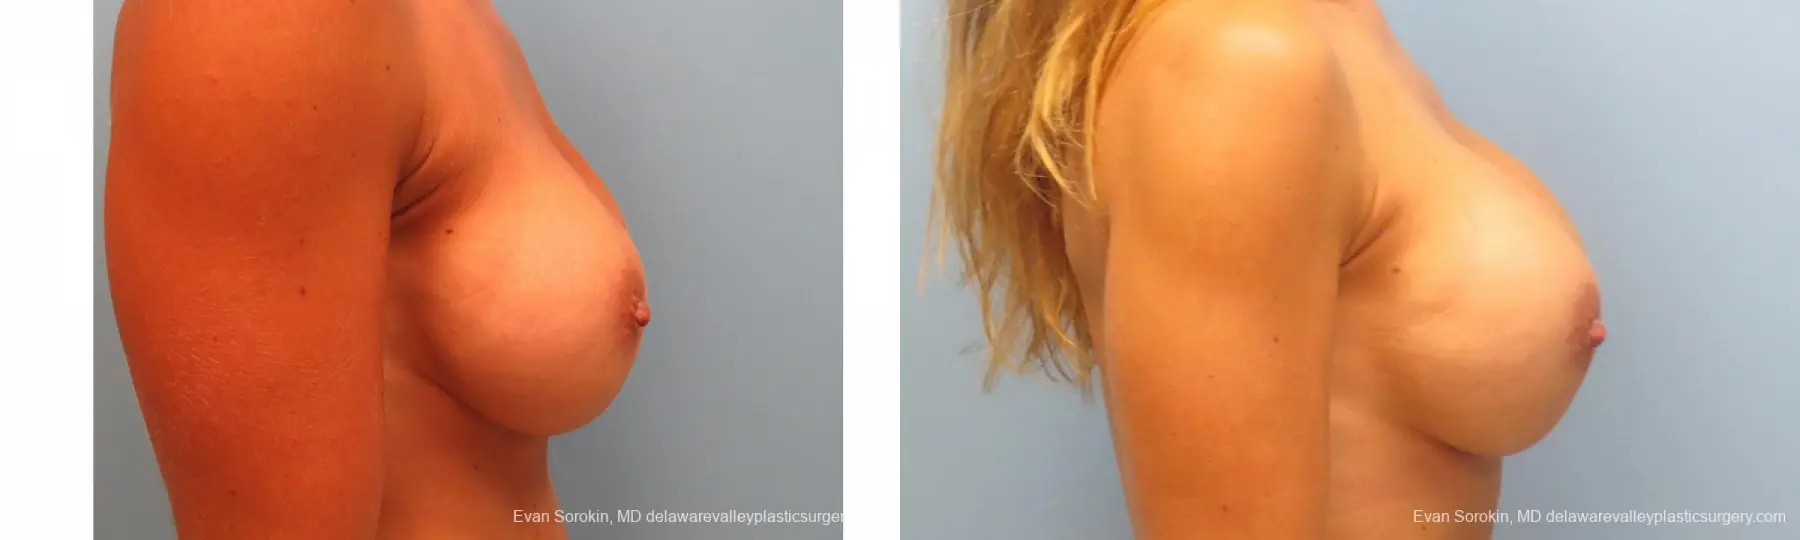 Breast Augmentation Revision: Patient 10 - Before and After 5